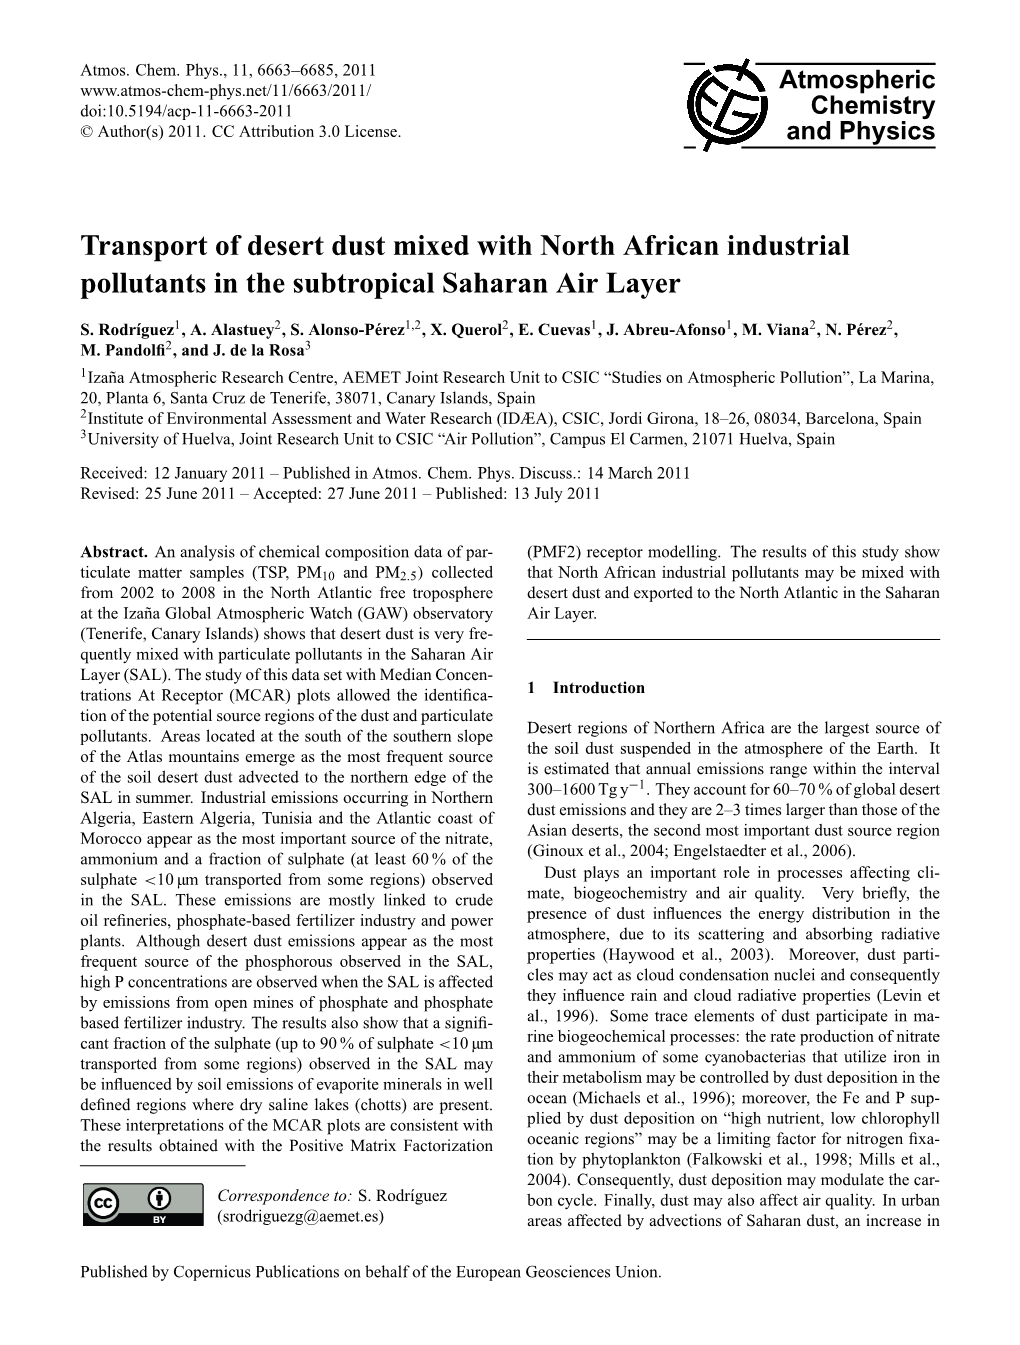 Transport of Desert Dust Mixed with North African Industrial Pollutants in the Subtropical Saharan Air Layer